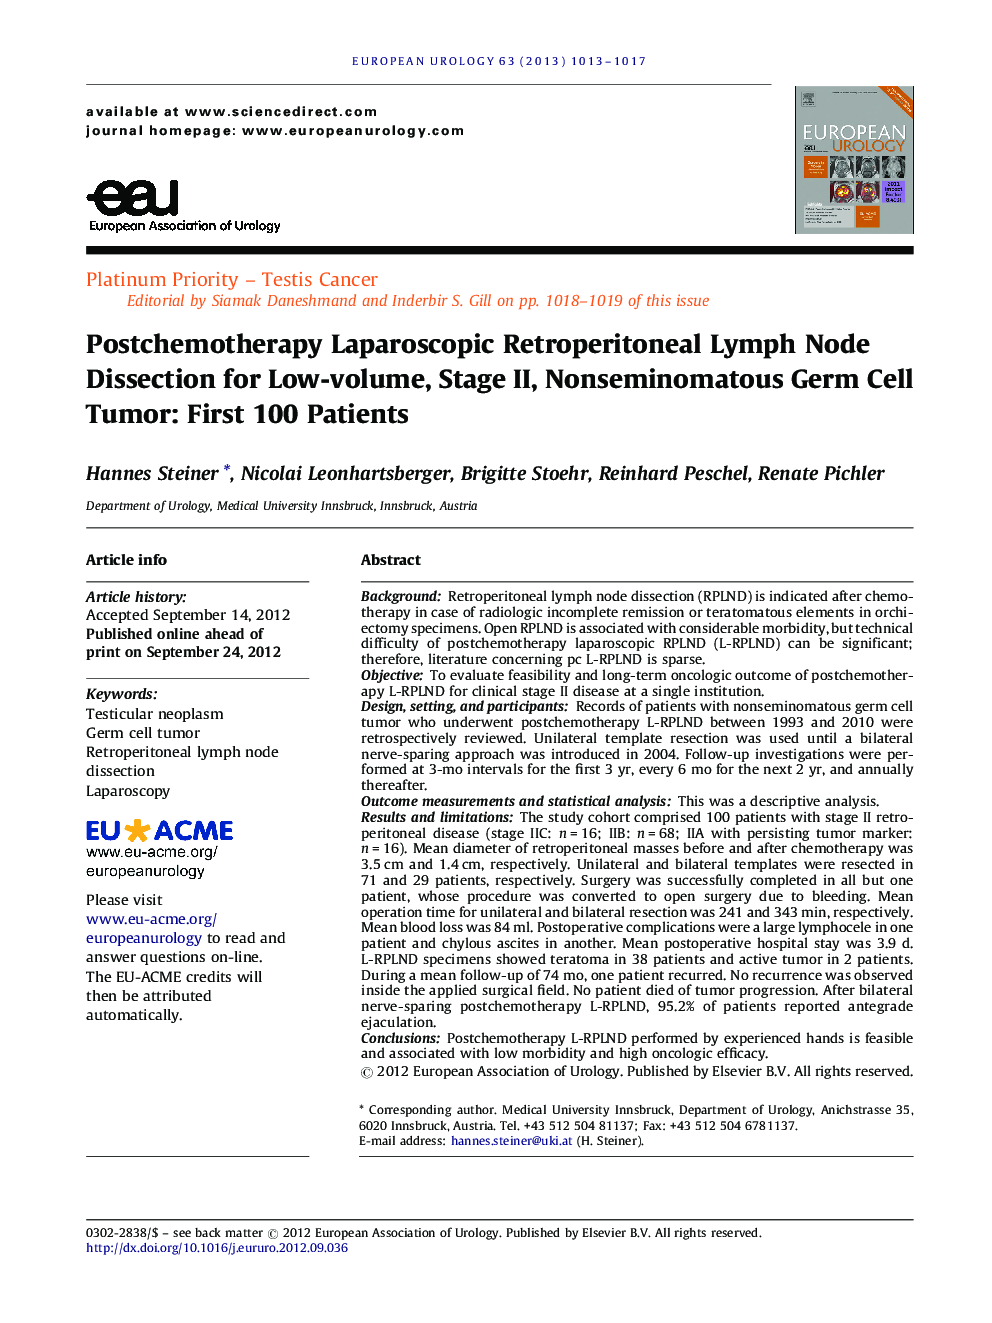 Postchemotherapy Laparoscopic Retroperitoneal Lymph Node Dissection for Low-volume, Stage II, Nonseminomatous Germ Cell Tumor: First 100 Patients 